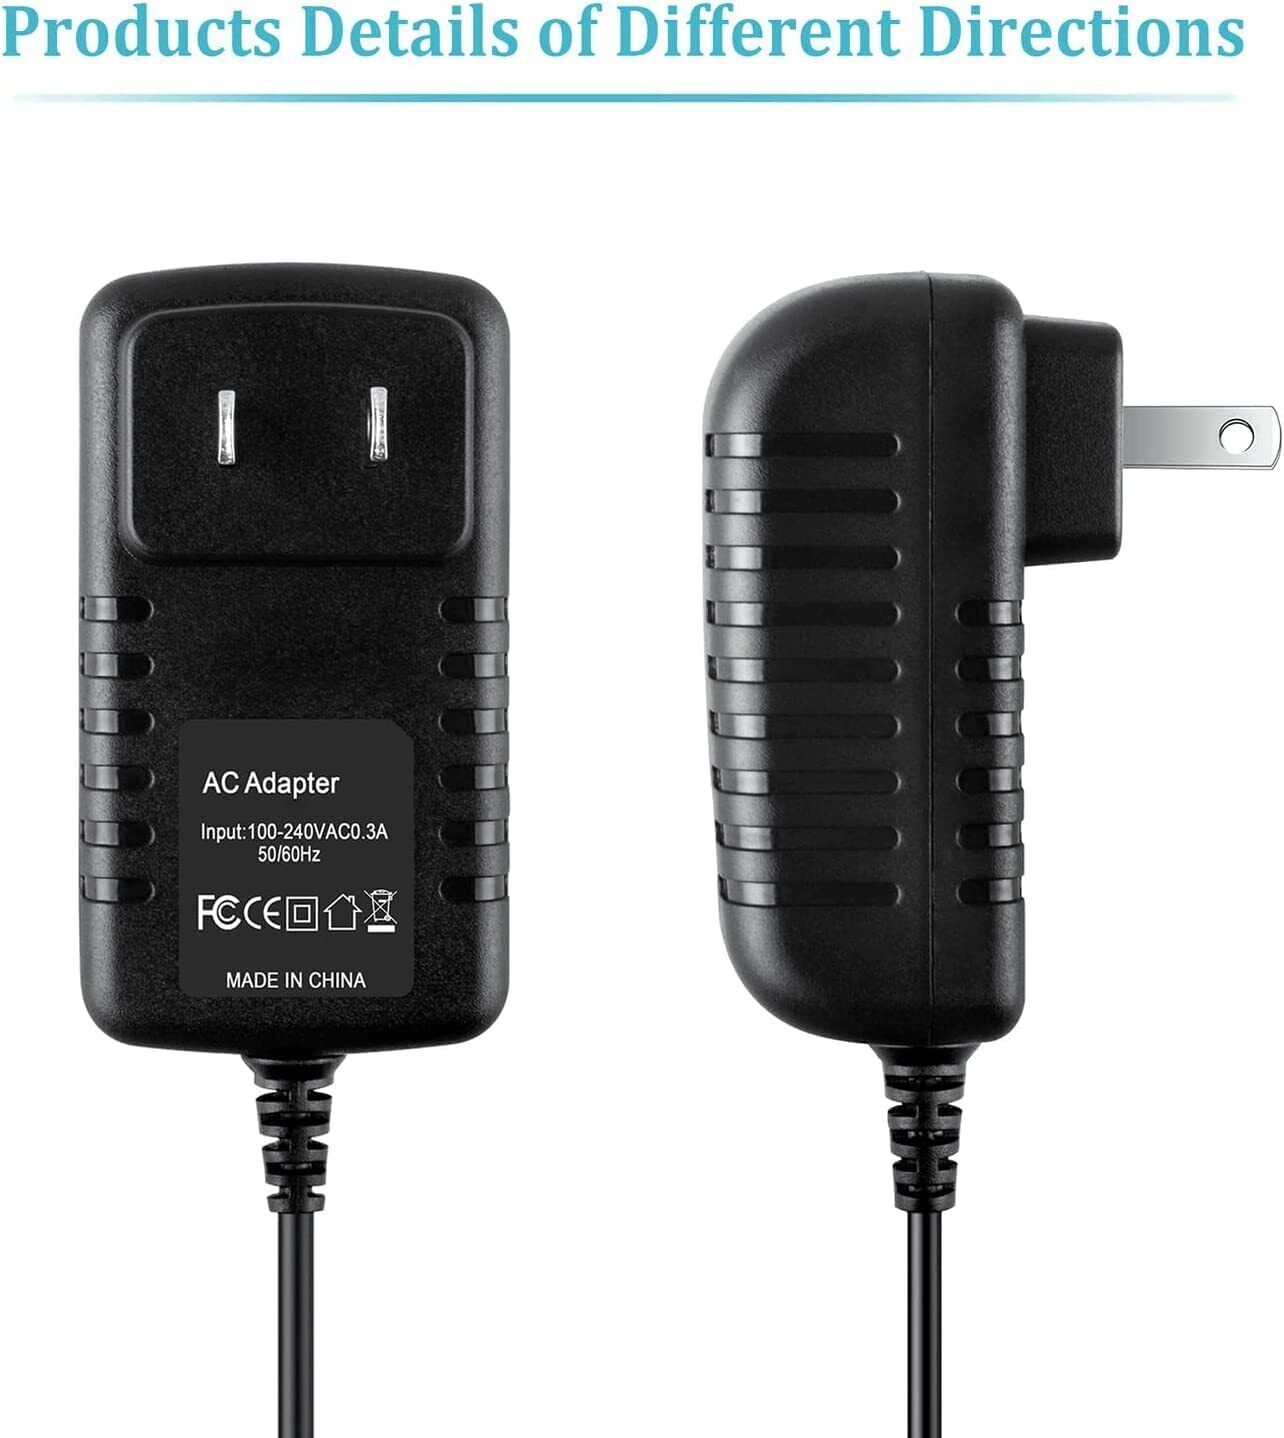 AC Adapter Power Cord For Tineco iFLOOR, iFLOOR 3, FLOOR ONE S3 Vacuum Cleaner Compatible Brand For TINECO Connection